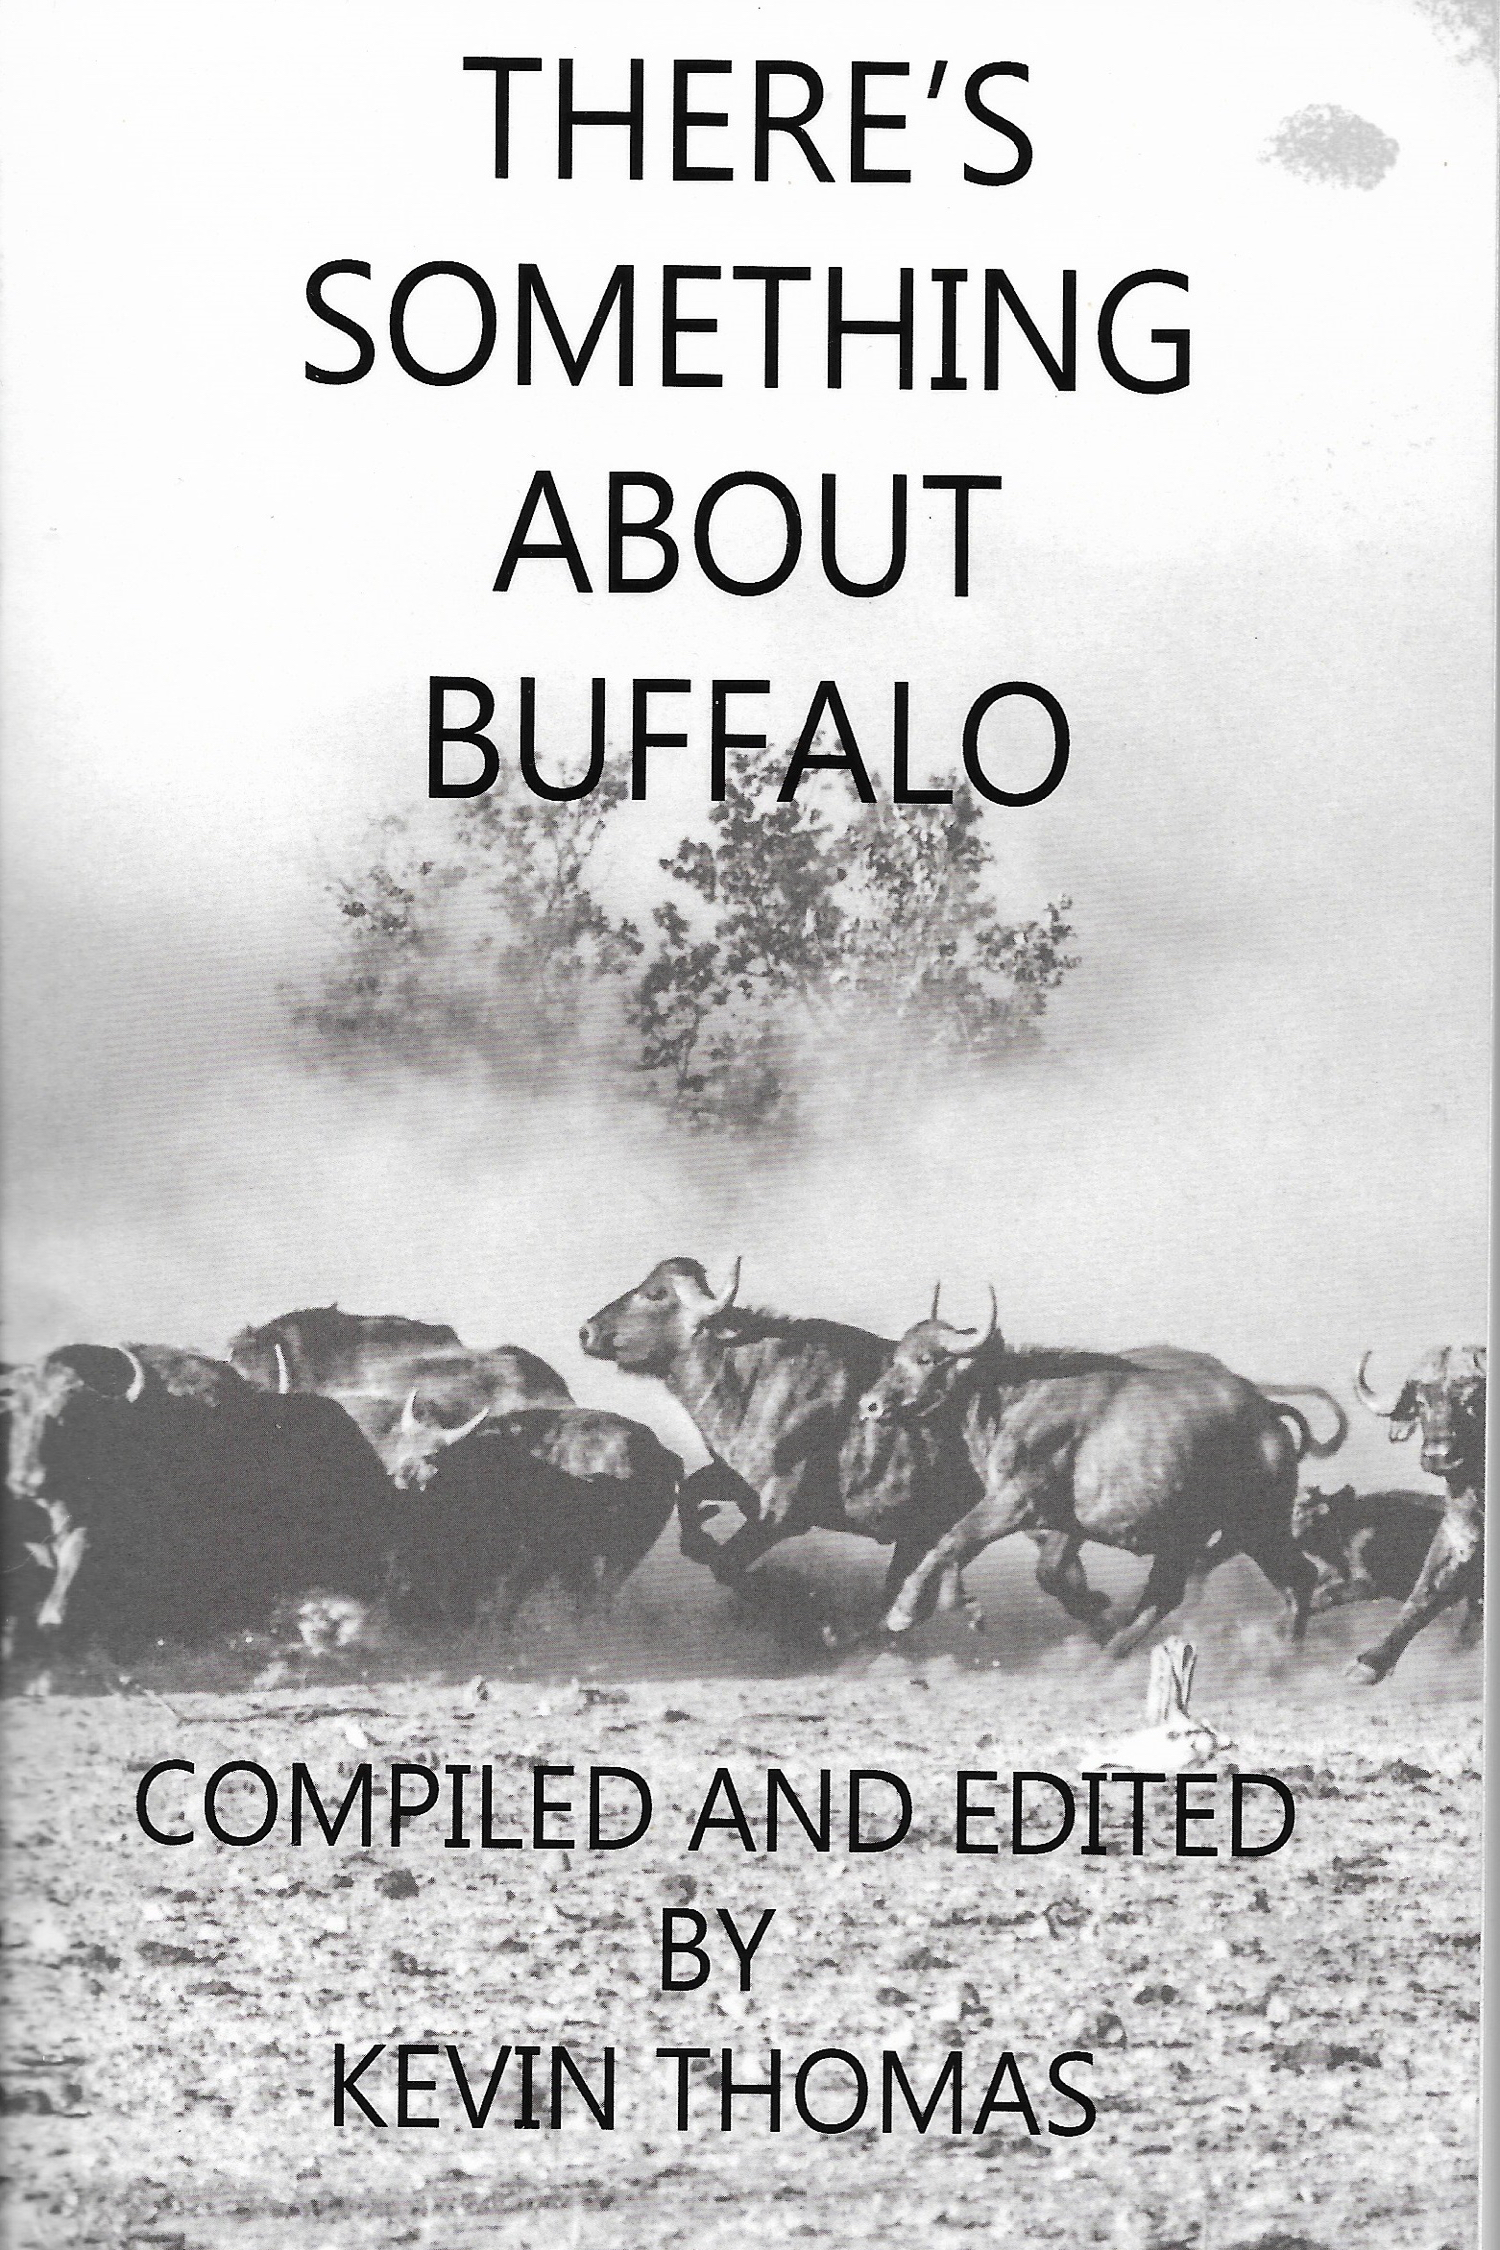 theres-something-about-buffalo-front.jpg